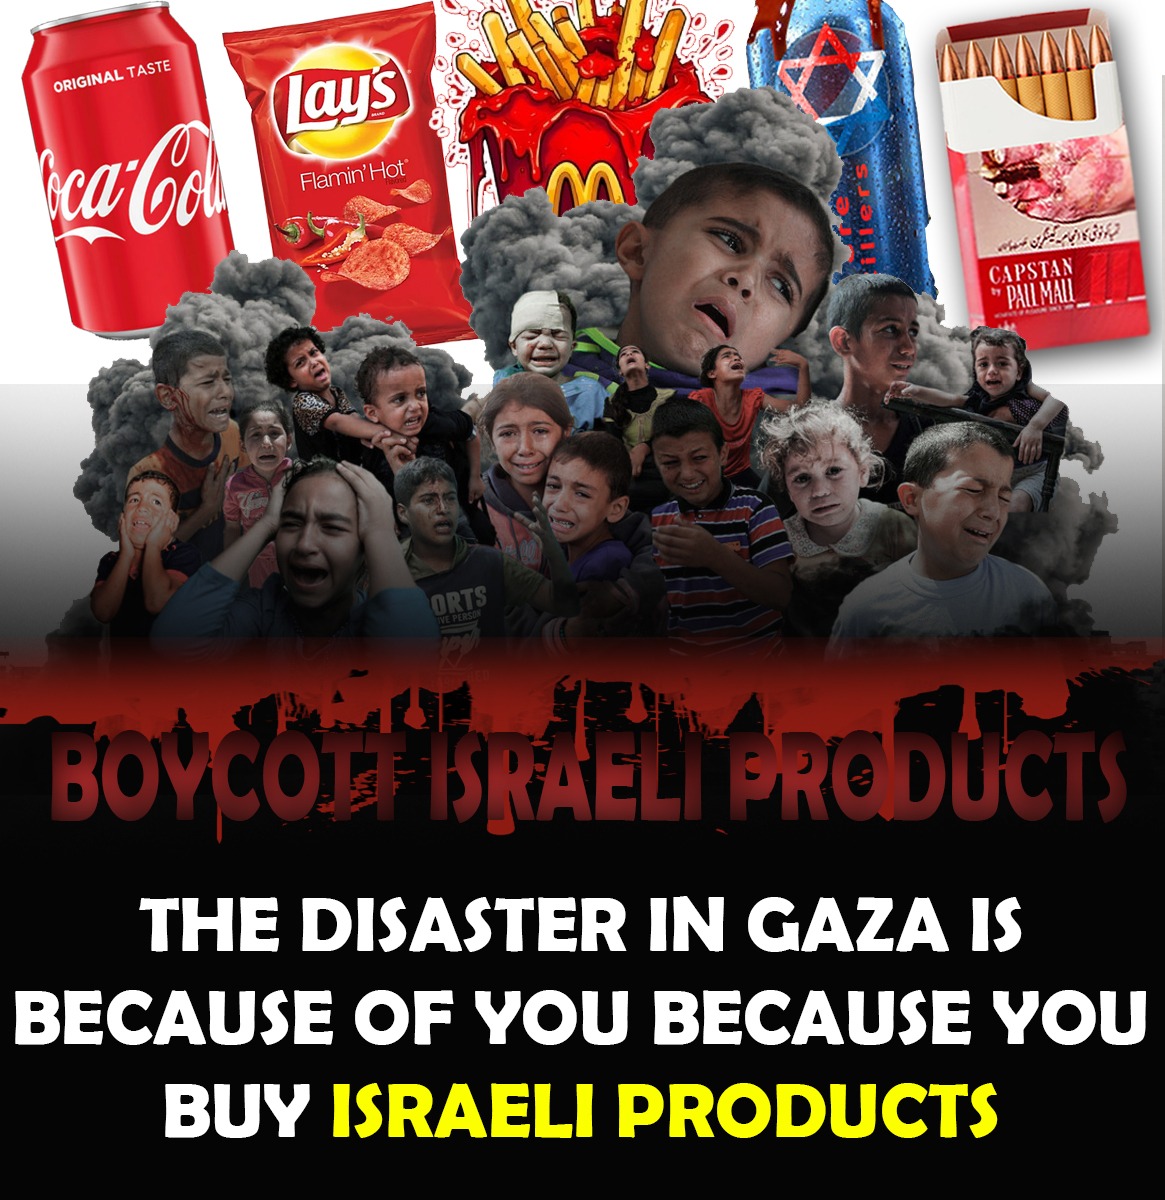 The disaster in gaza is because of you because you buy israeli products 
#فری_فلسطین